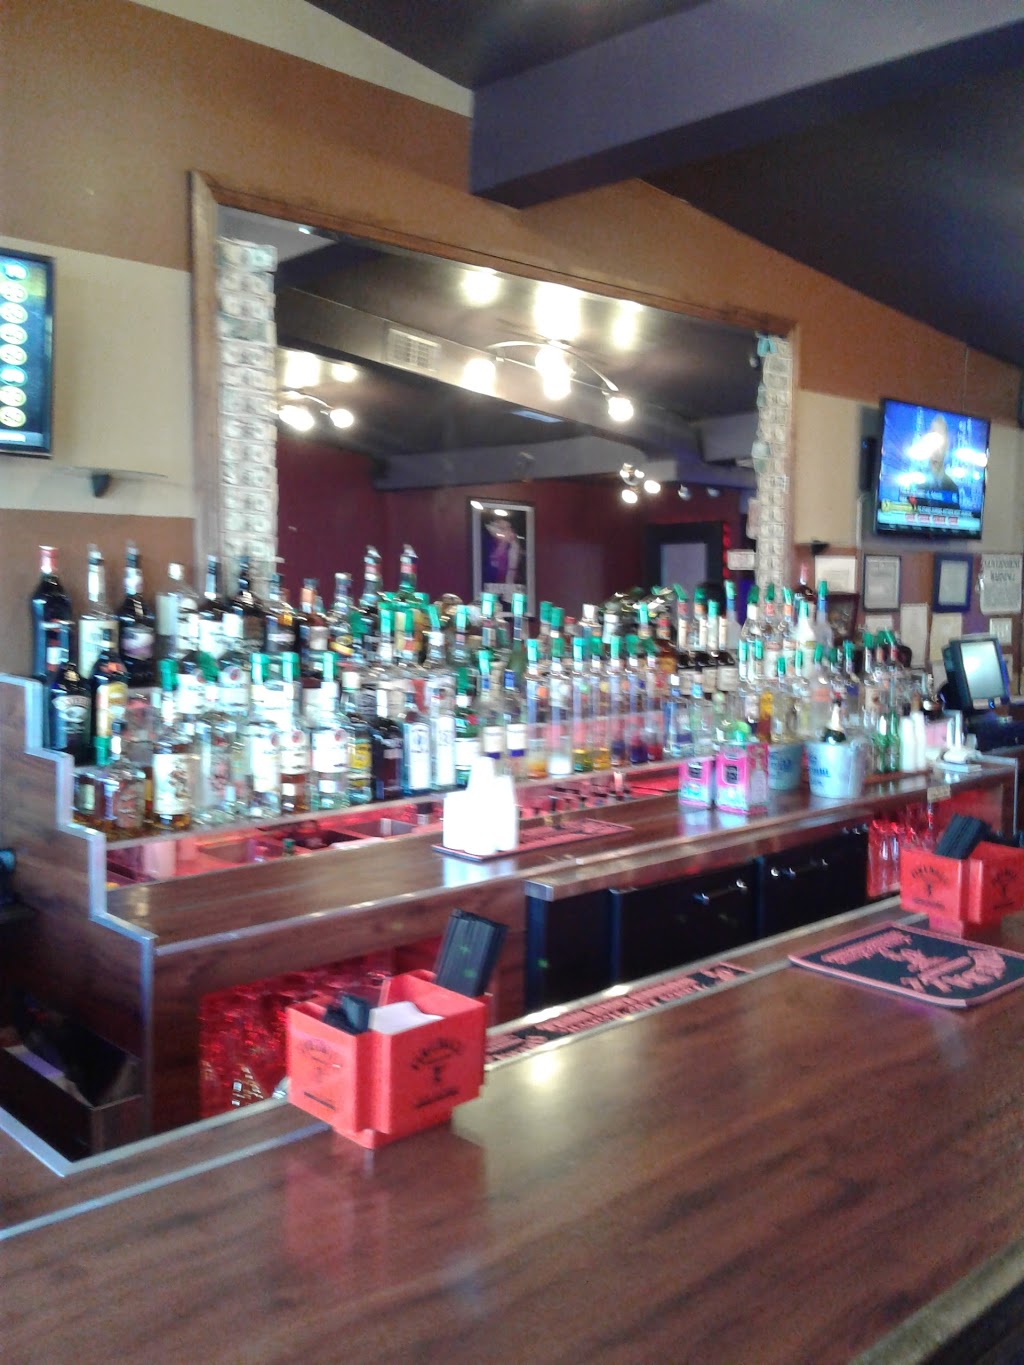 His And Hers Bar And Lounge | 259 Post Ave, Westbury, NY 11590, USA | Phone: (516) 385-3335